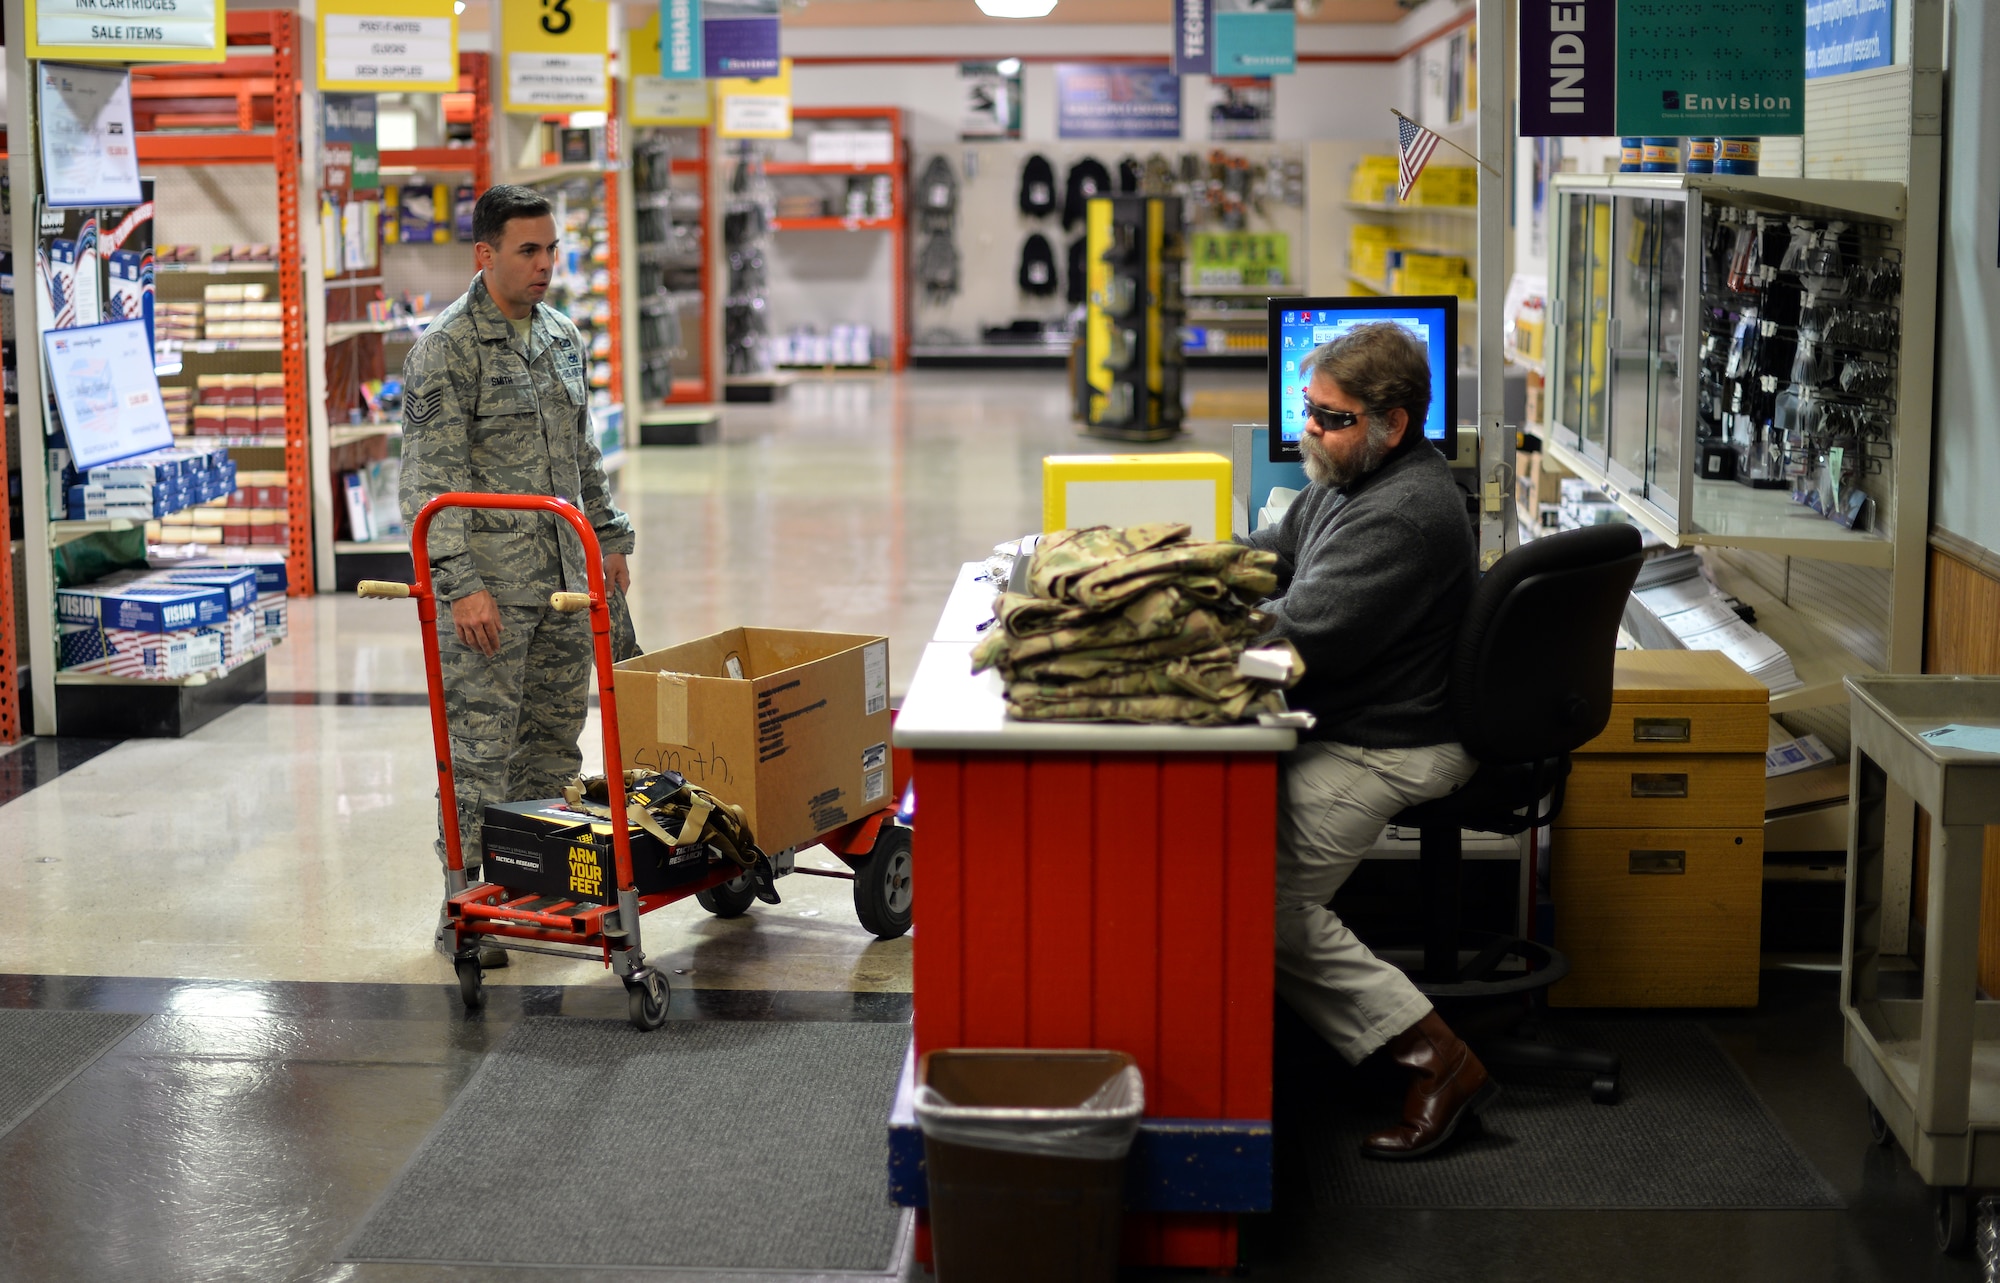 Mike Melichar rings up deployment items for Tech. Sgt. John Smith, a contracting officer in the 55th Contracting Squadron, Nov. 9, 2015 at the Envision Xpress store, Offutt Air Force Base, Neb. Melichar worked for a tiling company prior to taking the job at Envisoin. (U.S Air Force photo by Josh Plueger)